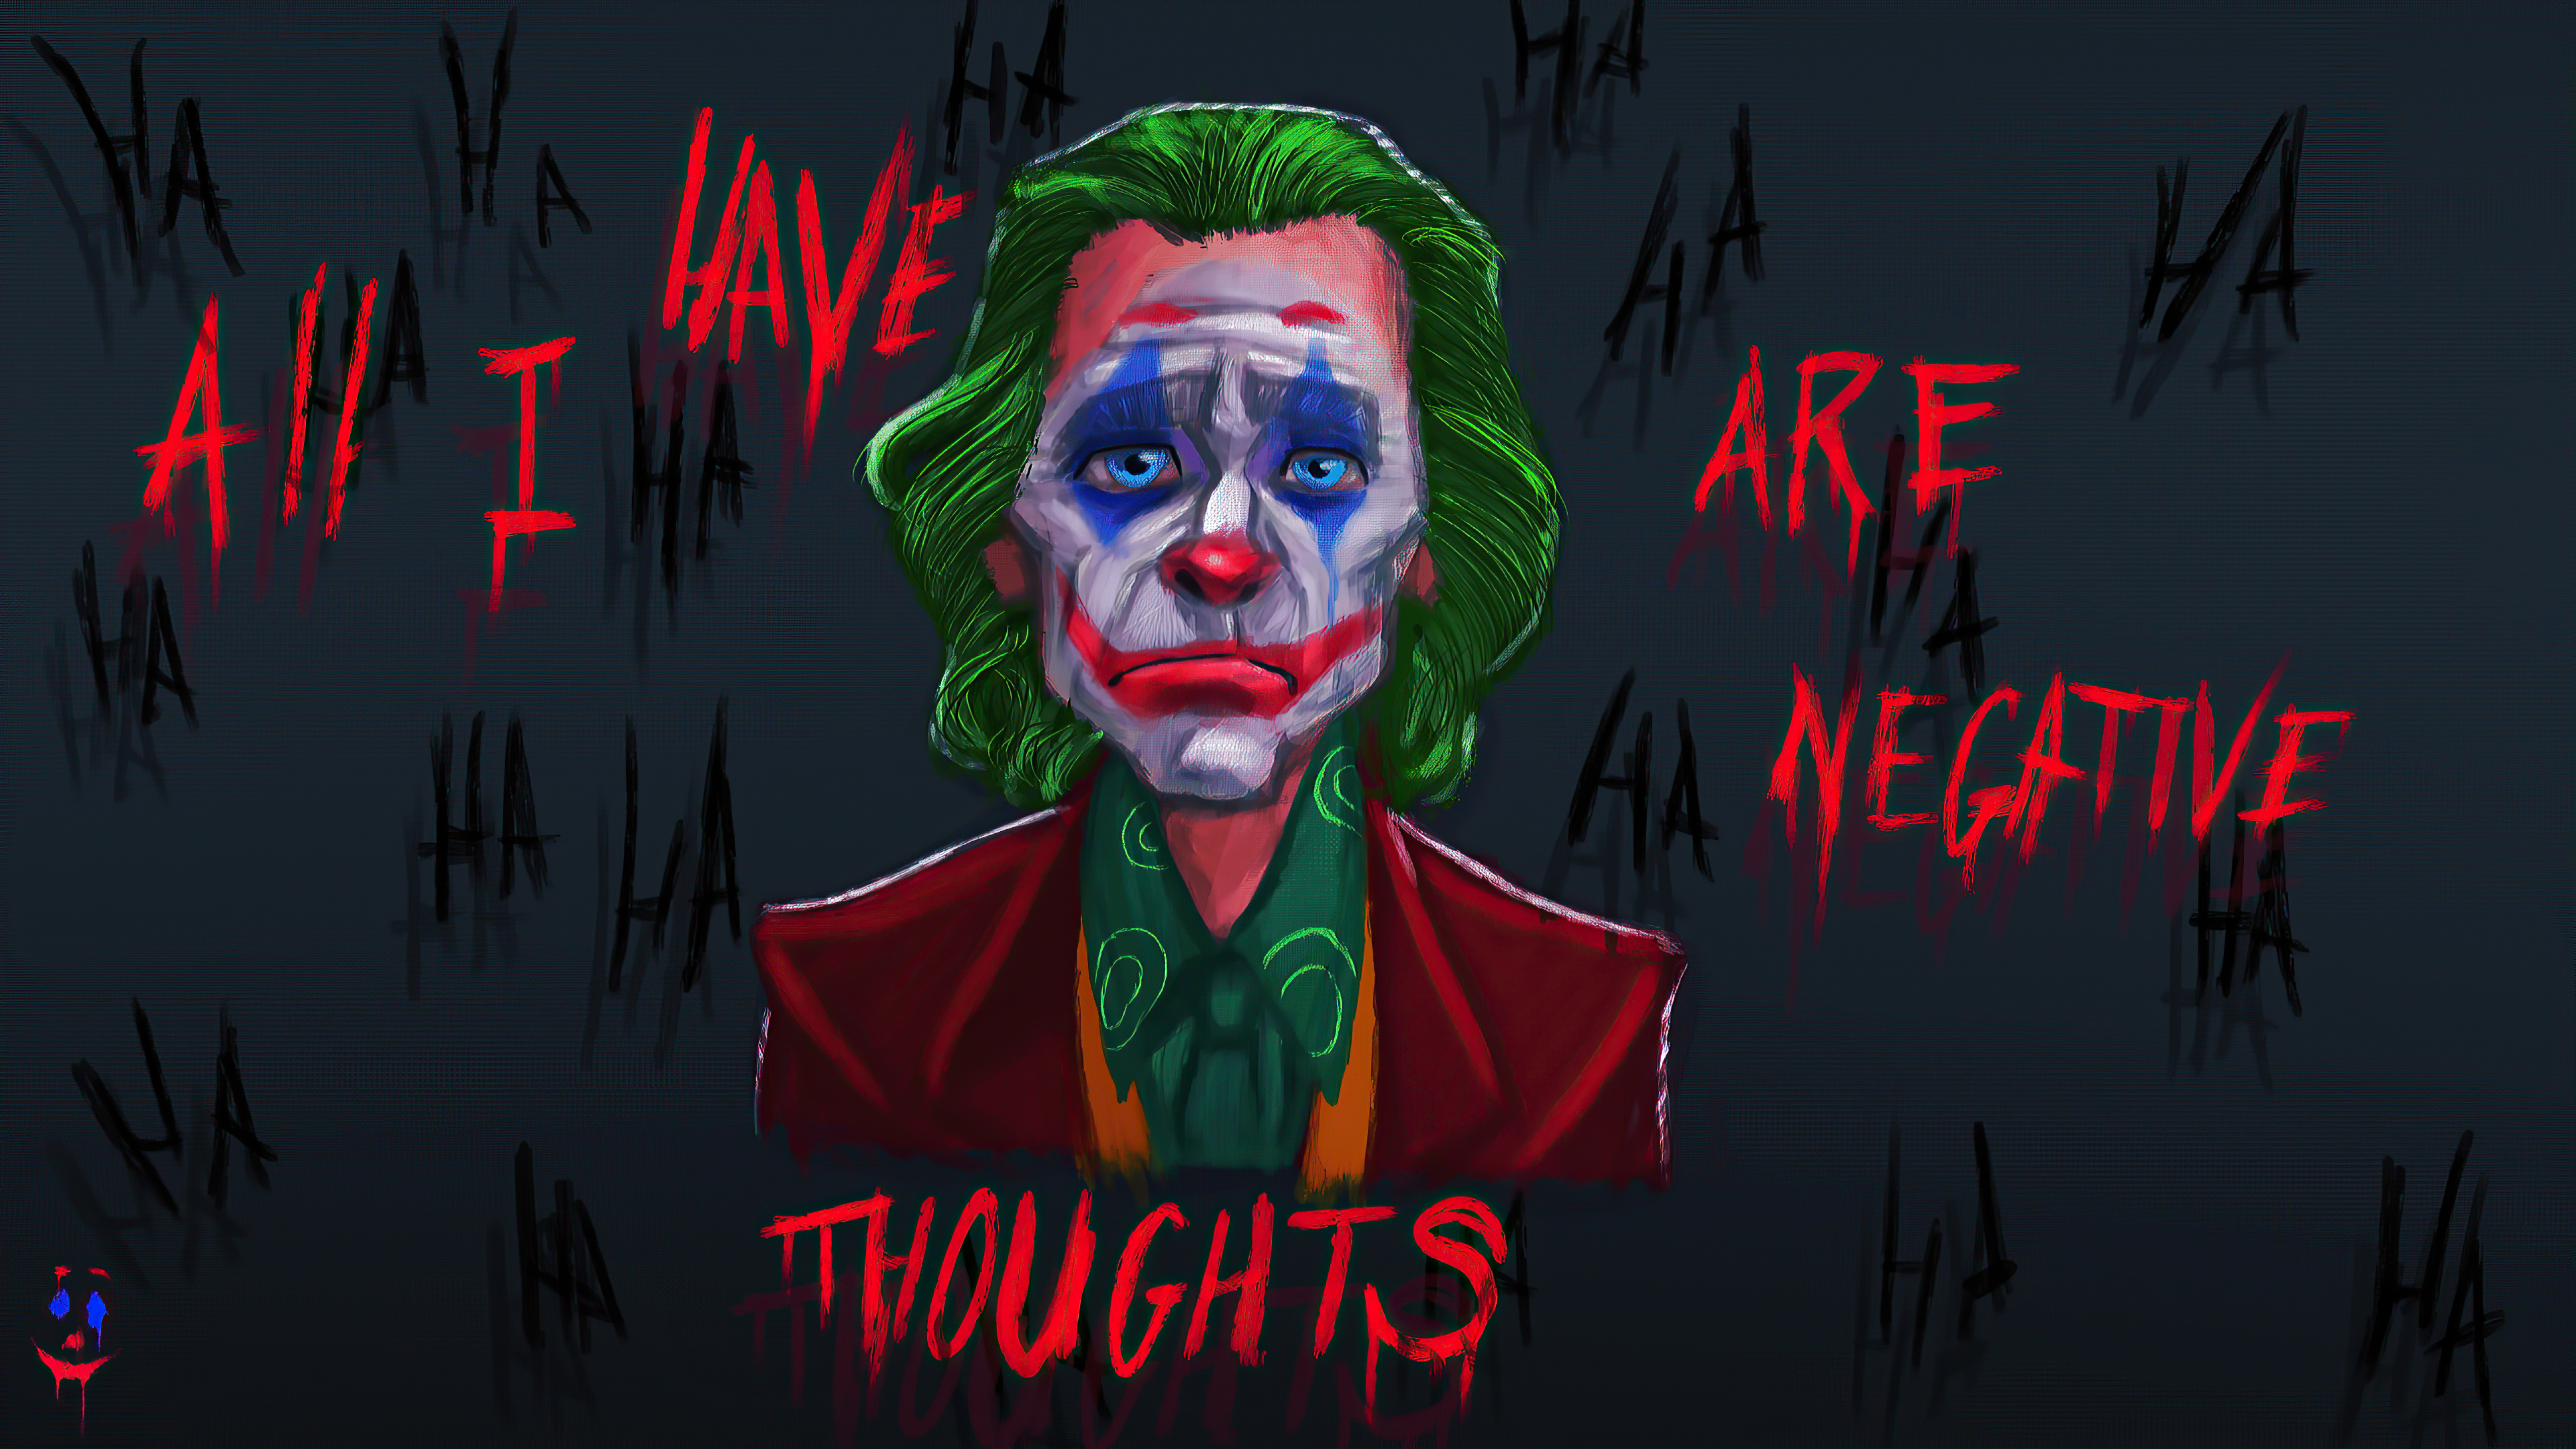 5120x2880 All I have are Negative Thoughts Joker 5K Wallpaper, HD  Superheroes 4K Wallpapers, Images, Photos and Background - Wallpapers Den